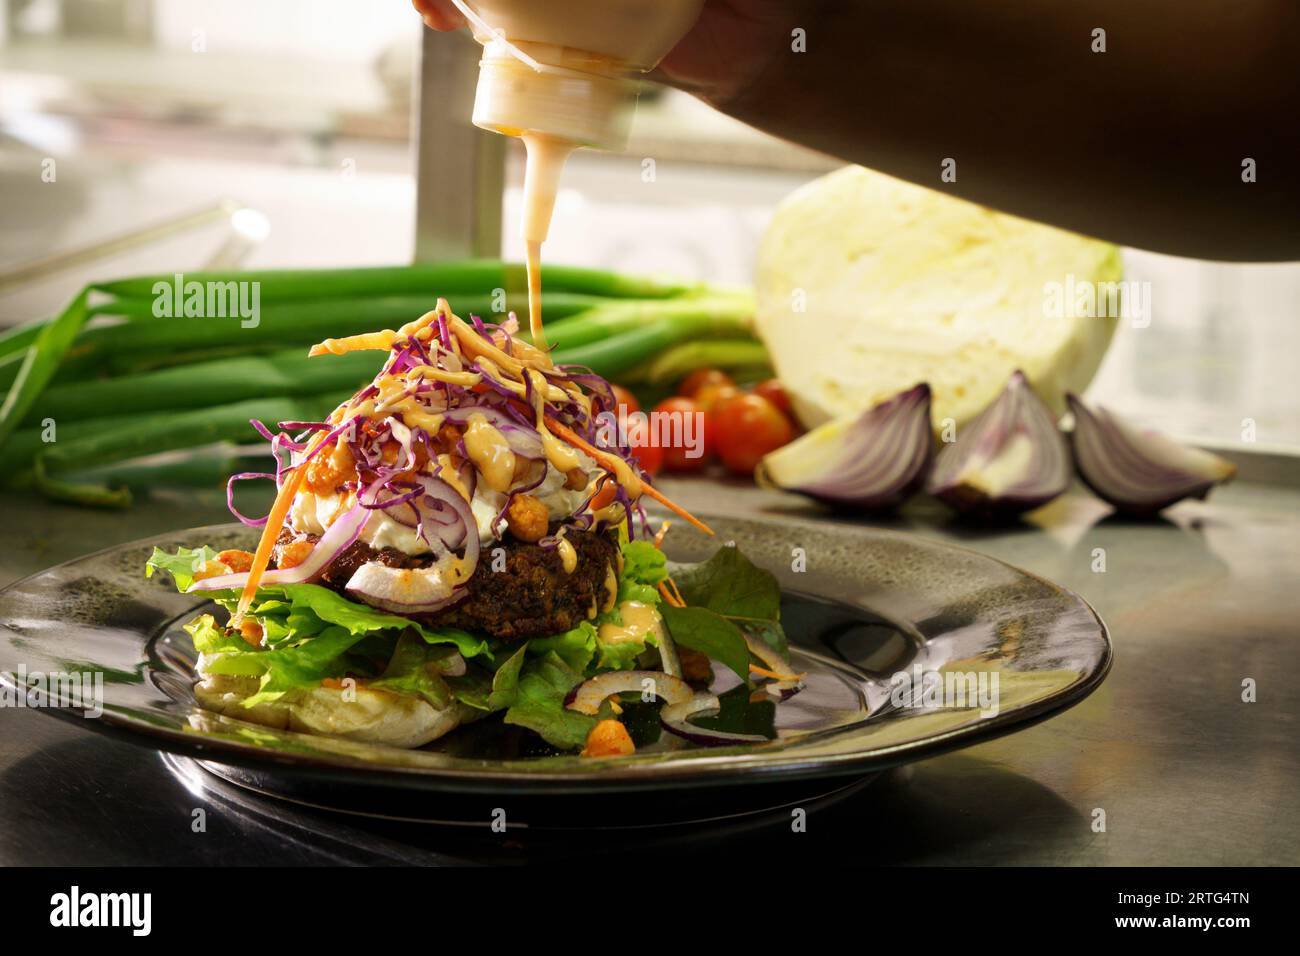 hamburger meal plated showing hand positioning garnishings and sauce Stock Photo